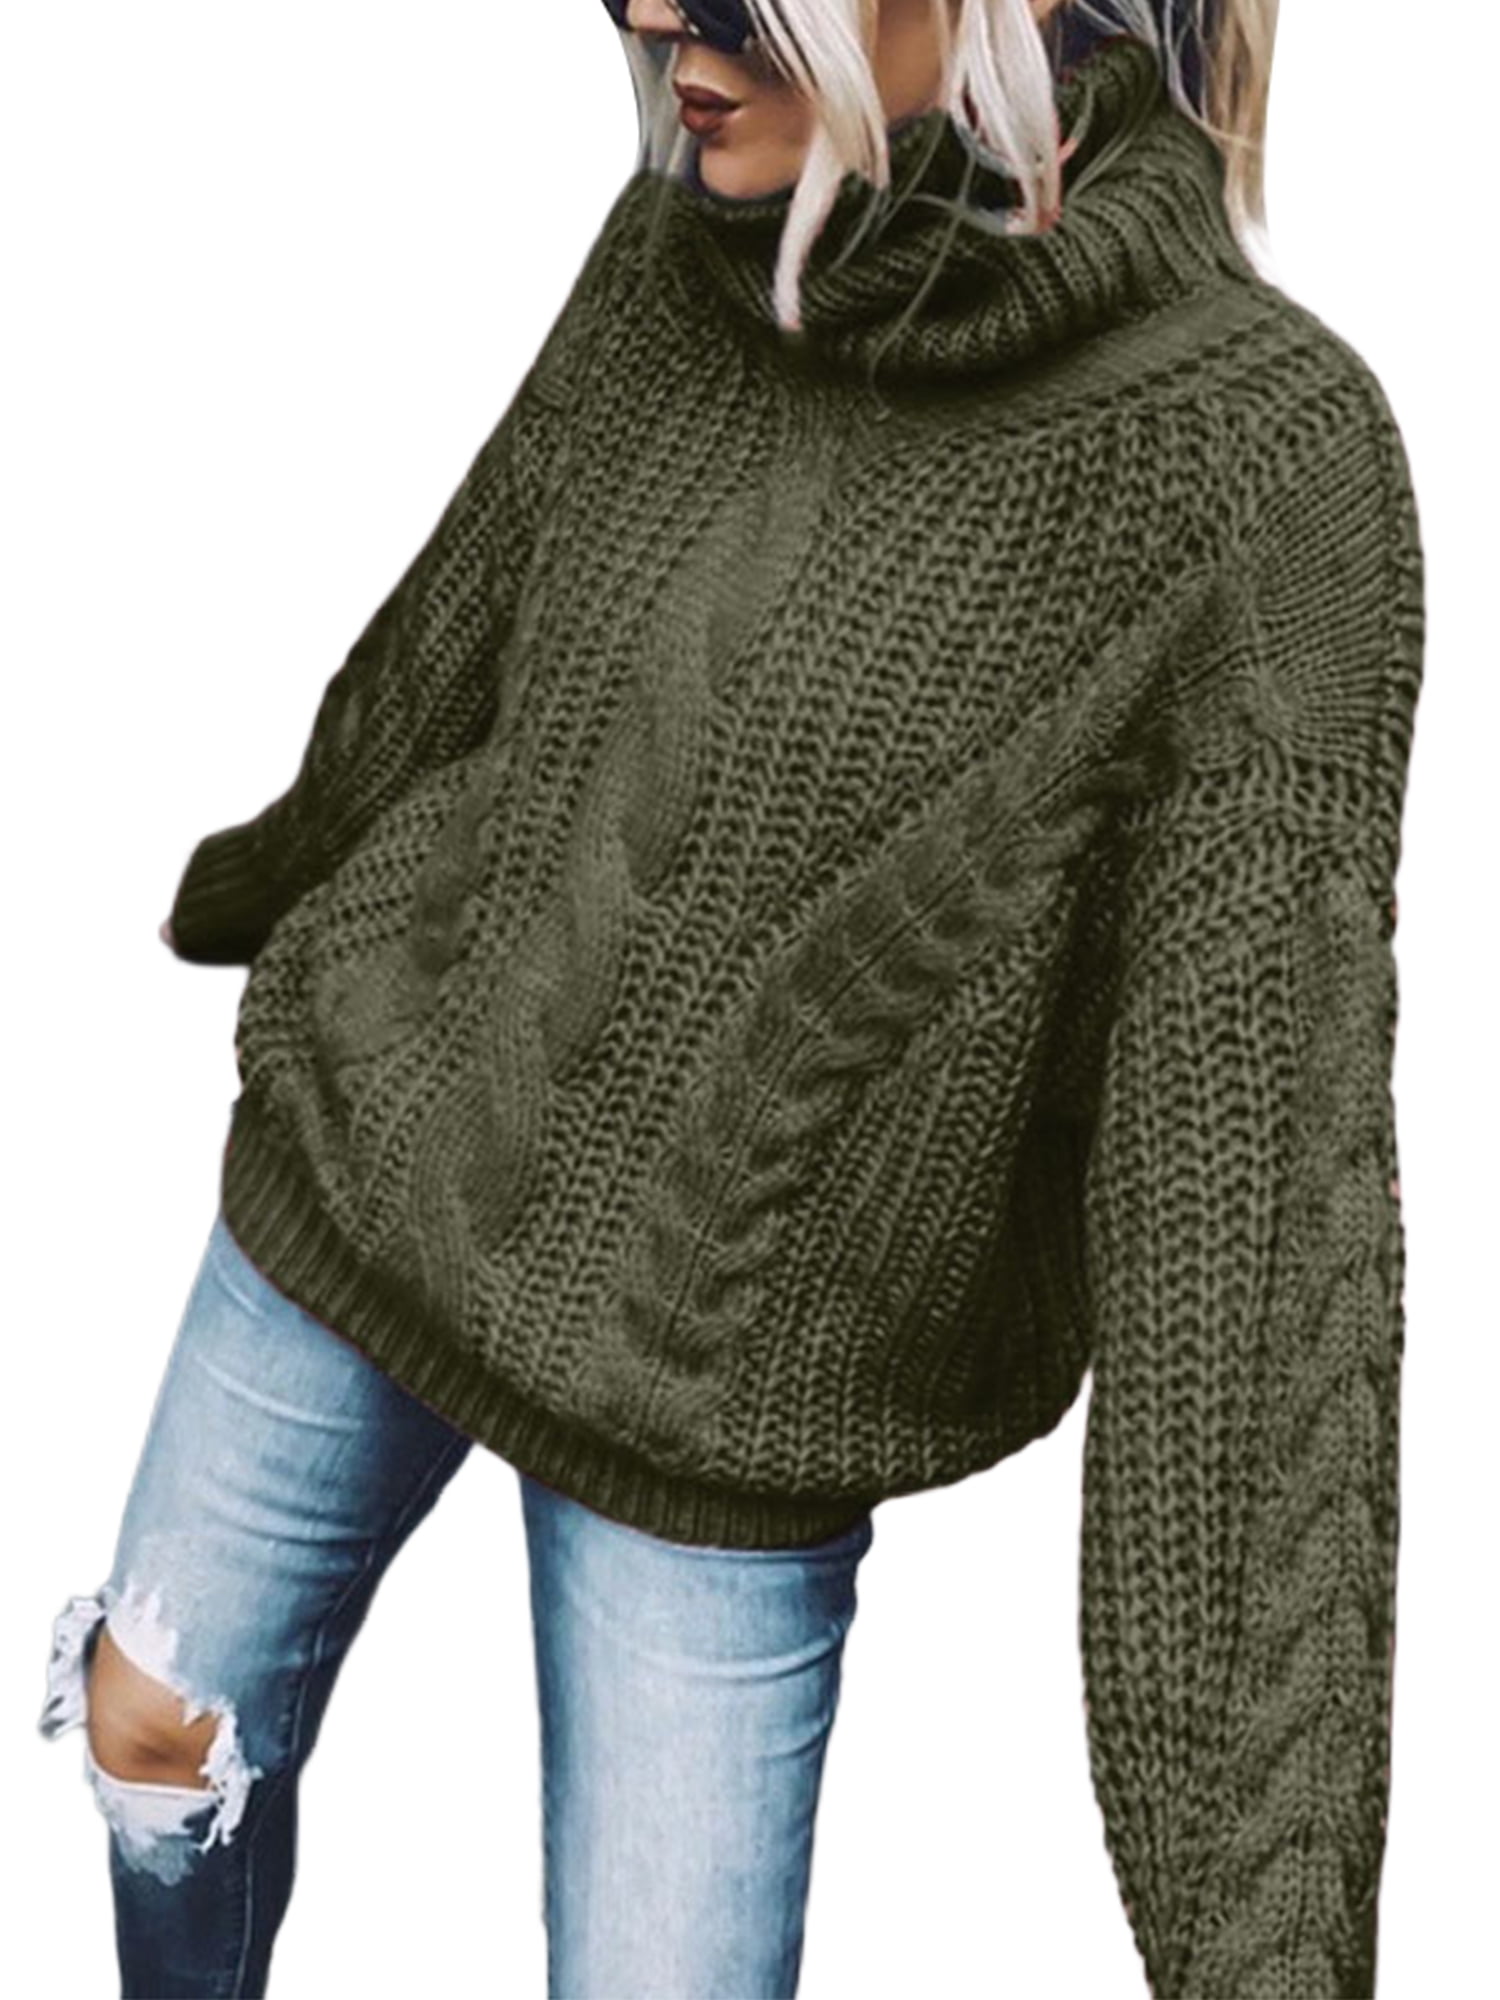 Women's Plain Long Sleeve Pullover Tops Ladies Knitted High Neck Jumper Sweater 